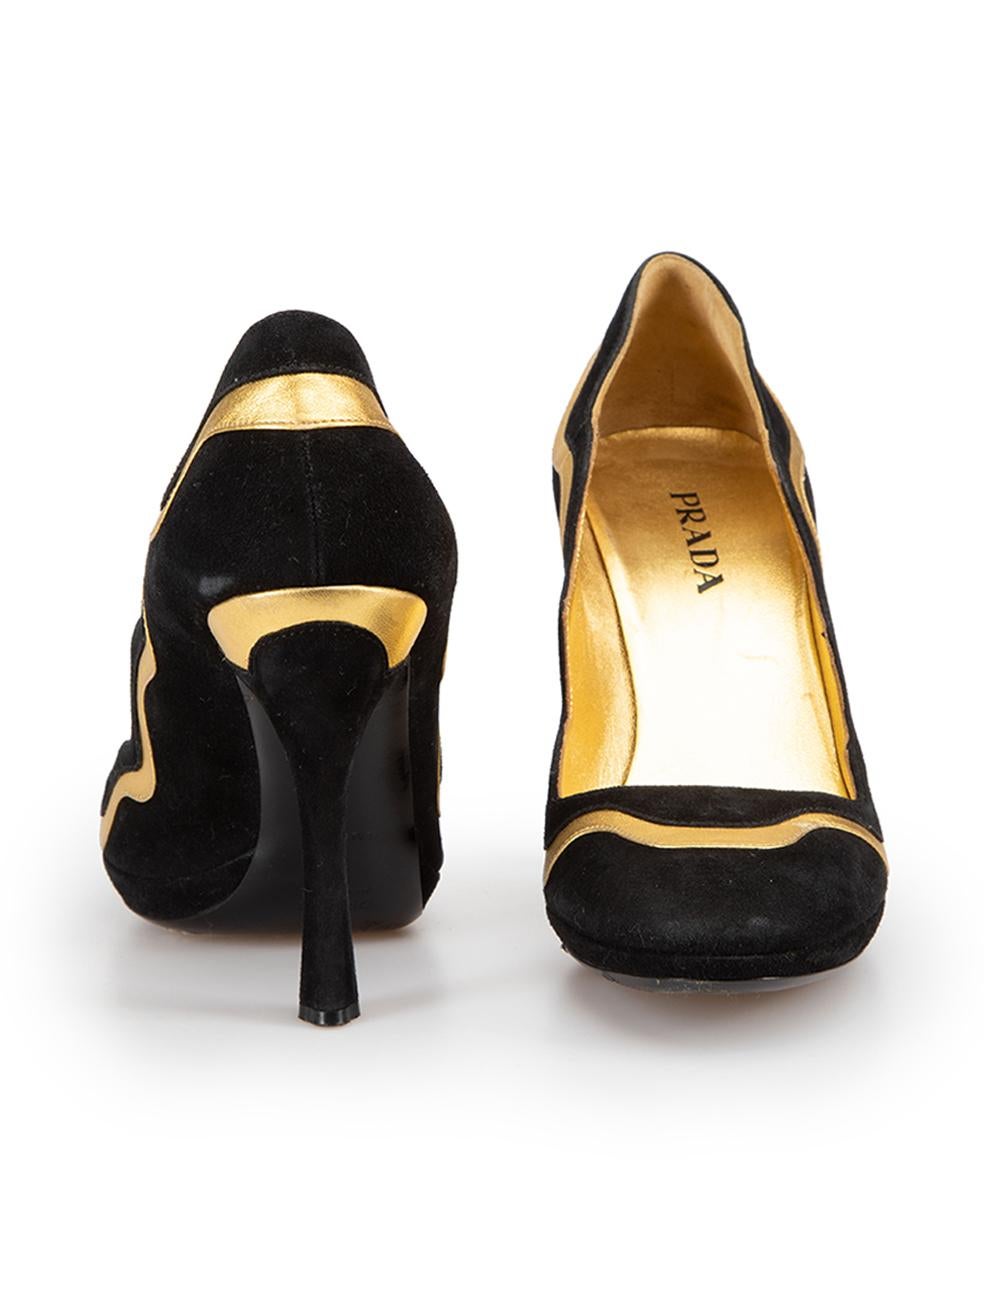 Prada Women's Black Suede Gold Accent Cuffed Pumps In Good Condition For Sale In London, GB